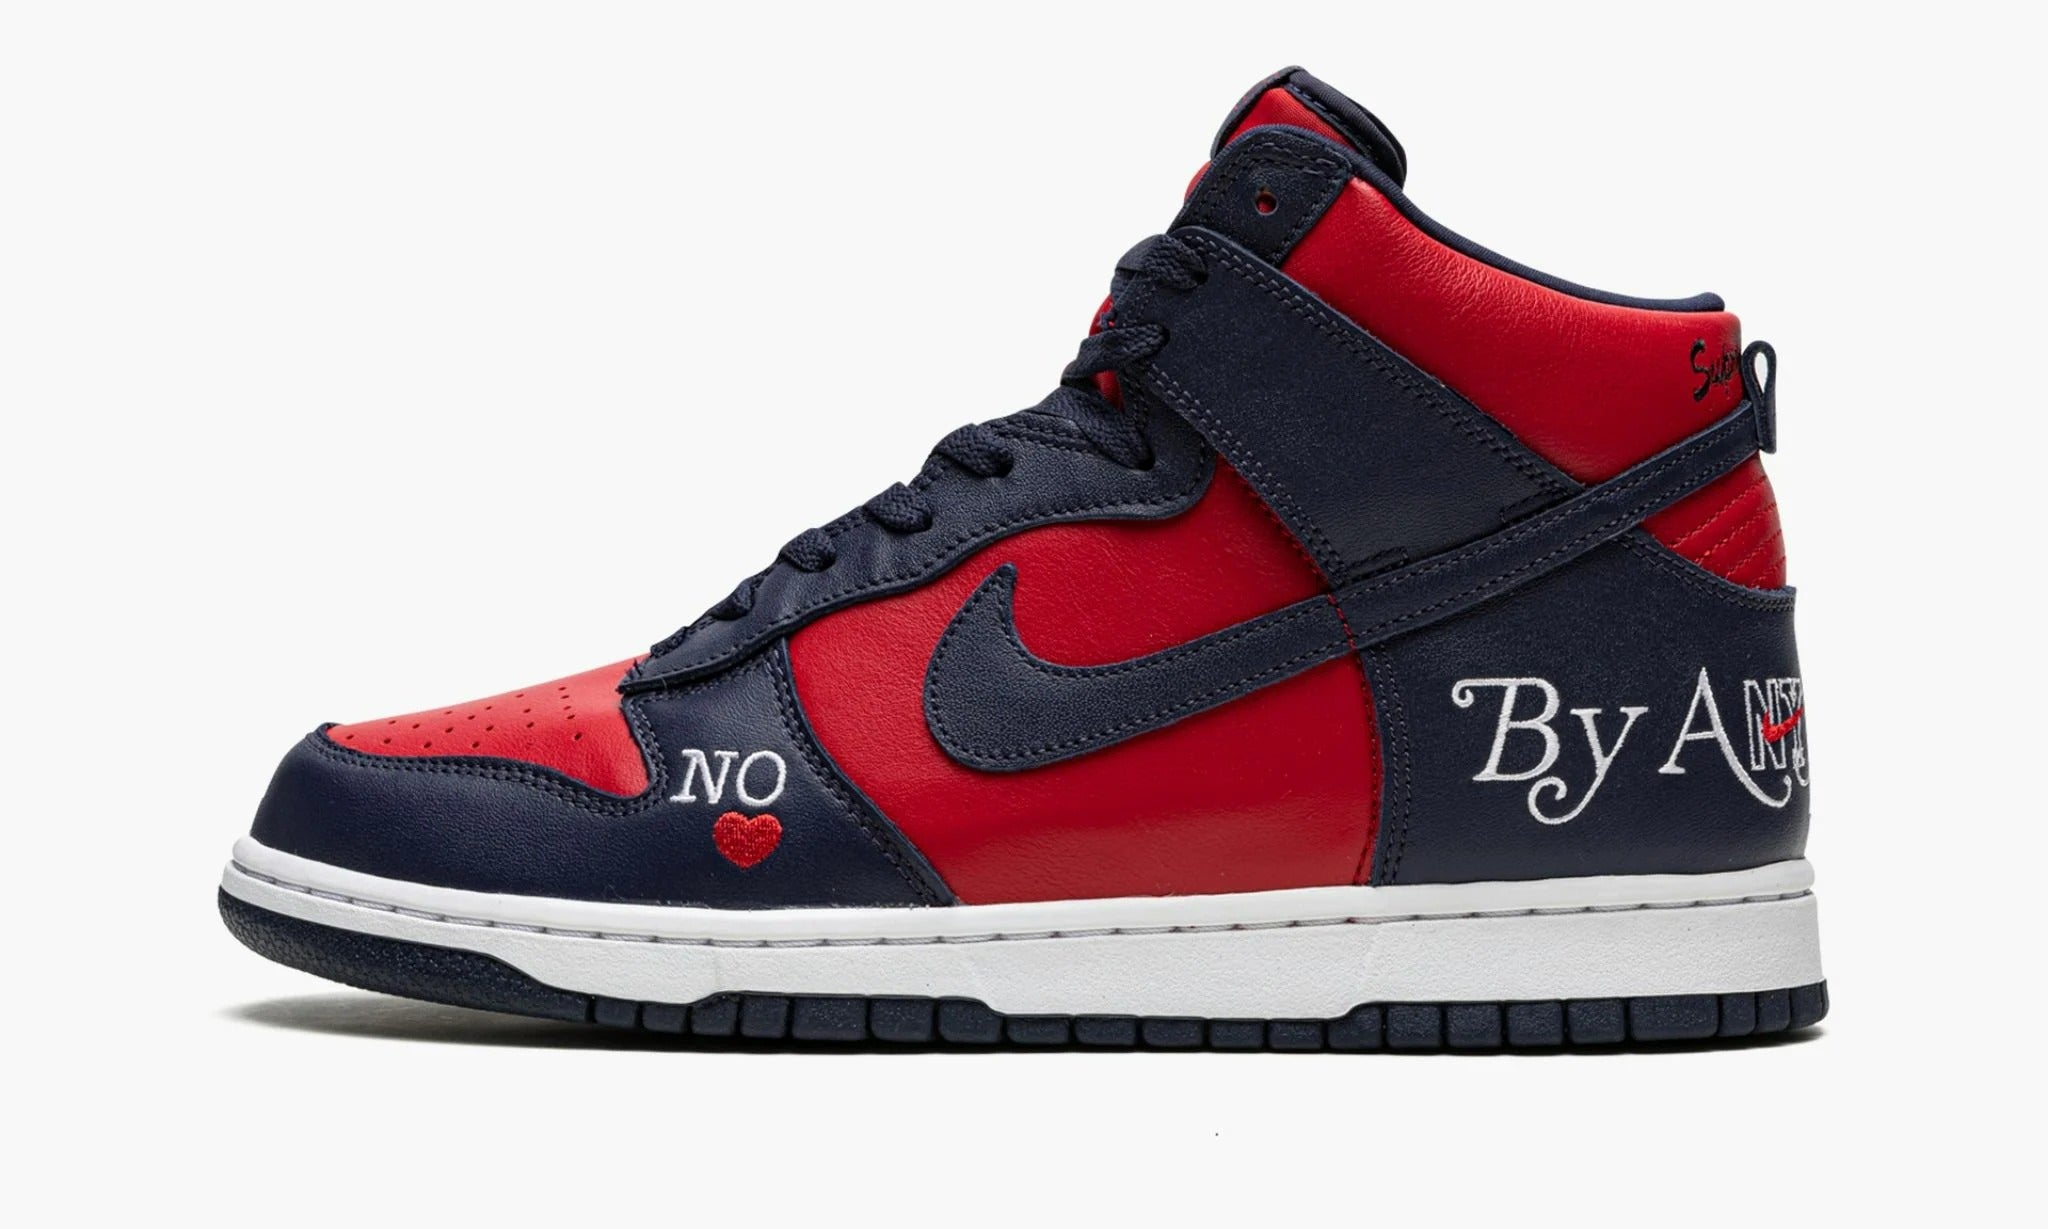 SB Dunk High Supreme By Any Means Navy 